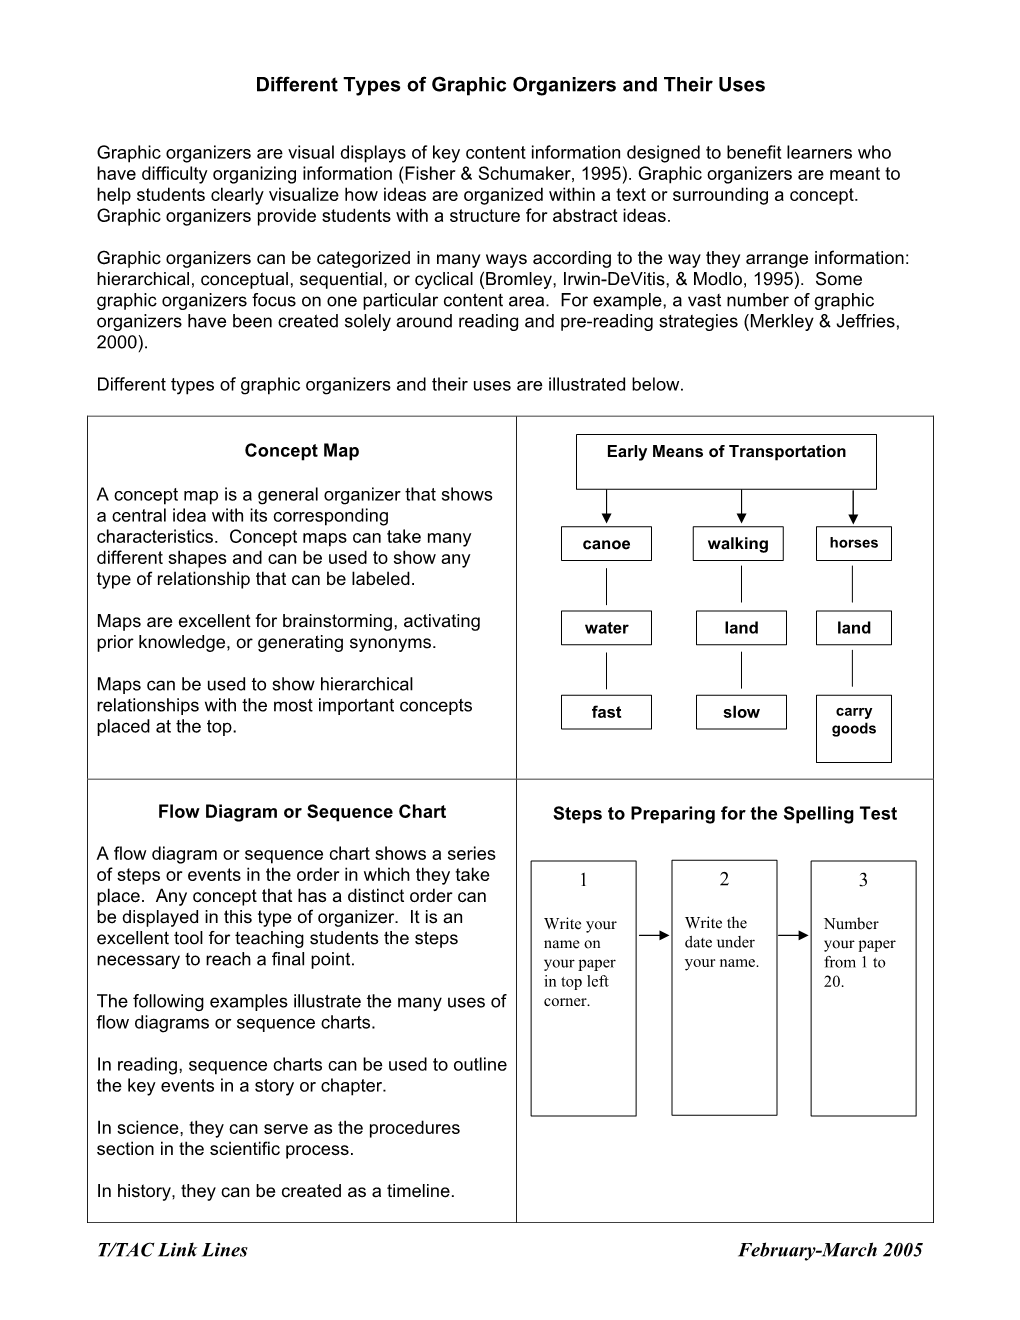 Different Types of Graphic Organizers and Their Uses (2005)